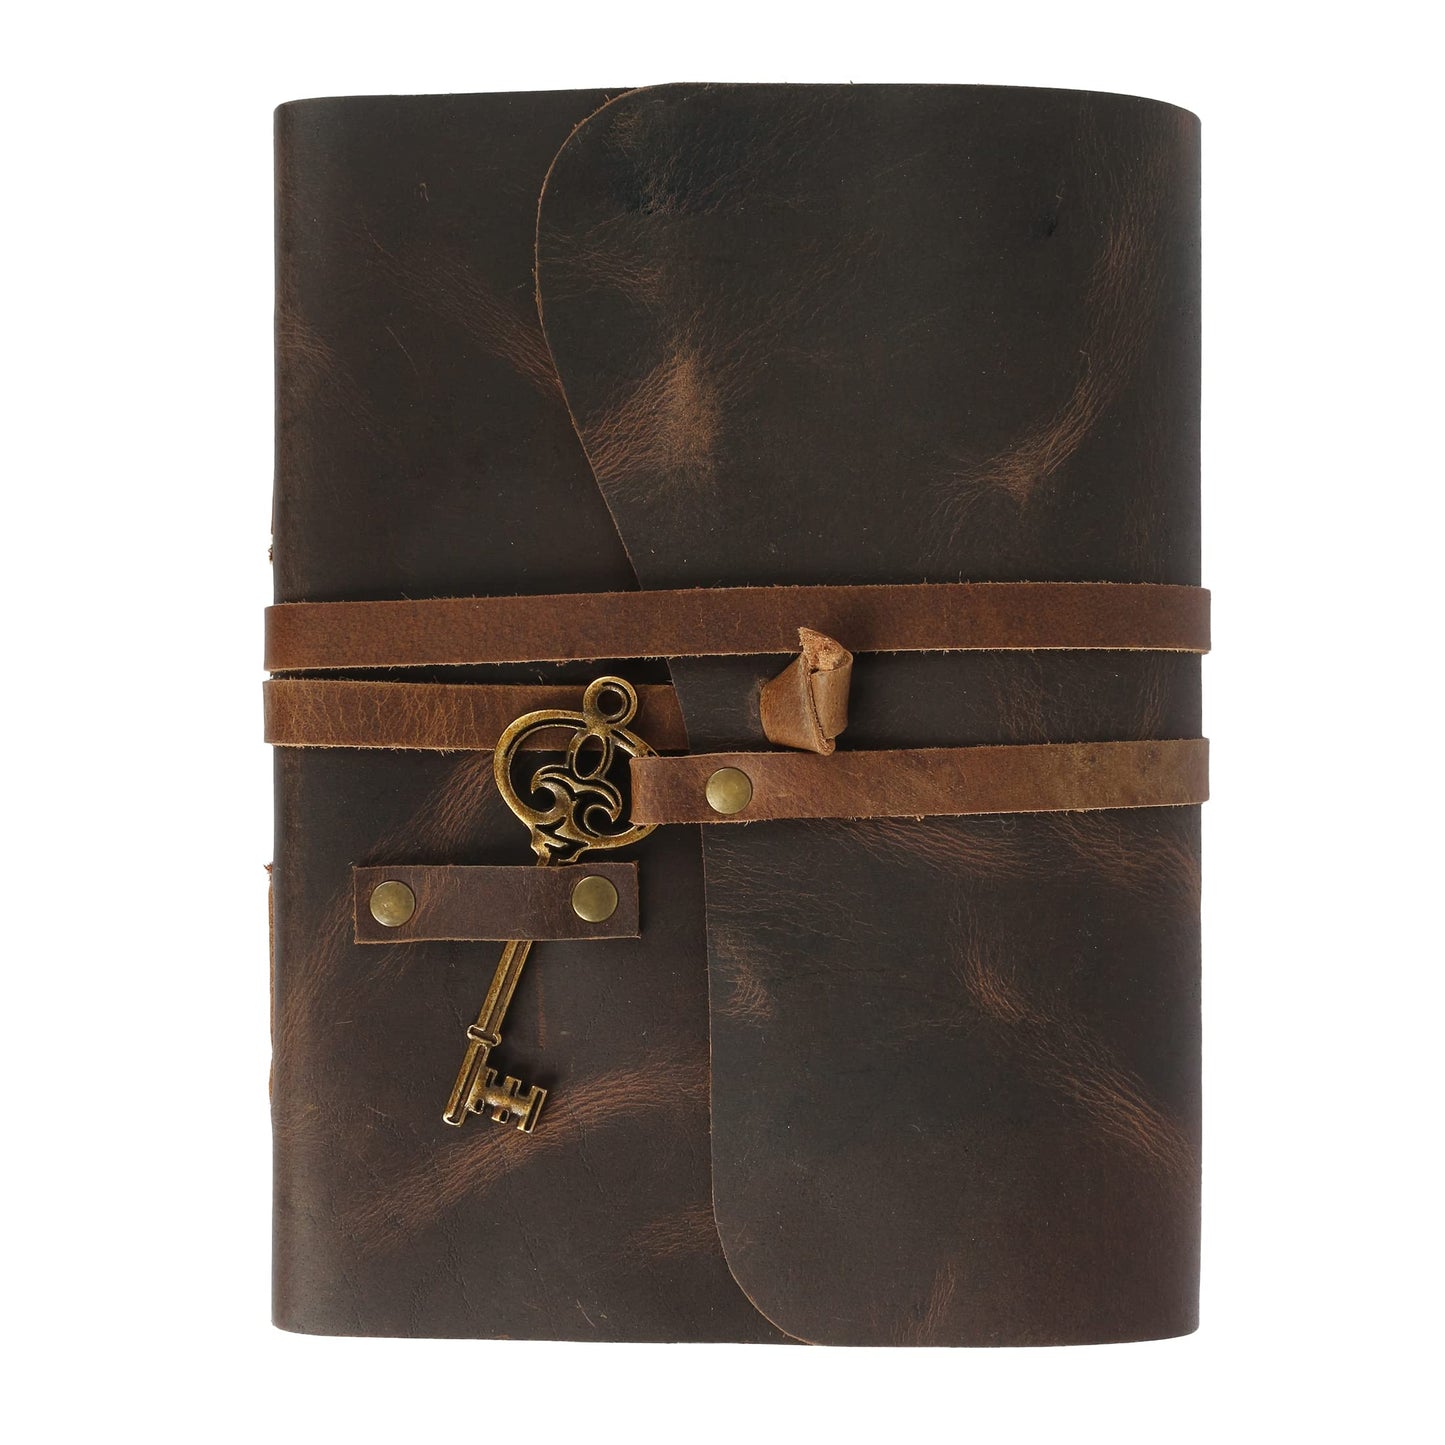 Leather Journal with lined Deckle Edge Paper 8x6 inch and Vintage Key/Handmade Writing Notebook Diary/Bound Daily Notepad for Men & Women Medium, Sketch/Writing pad for Artists